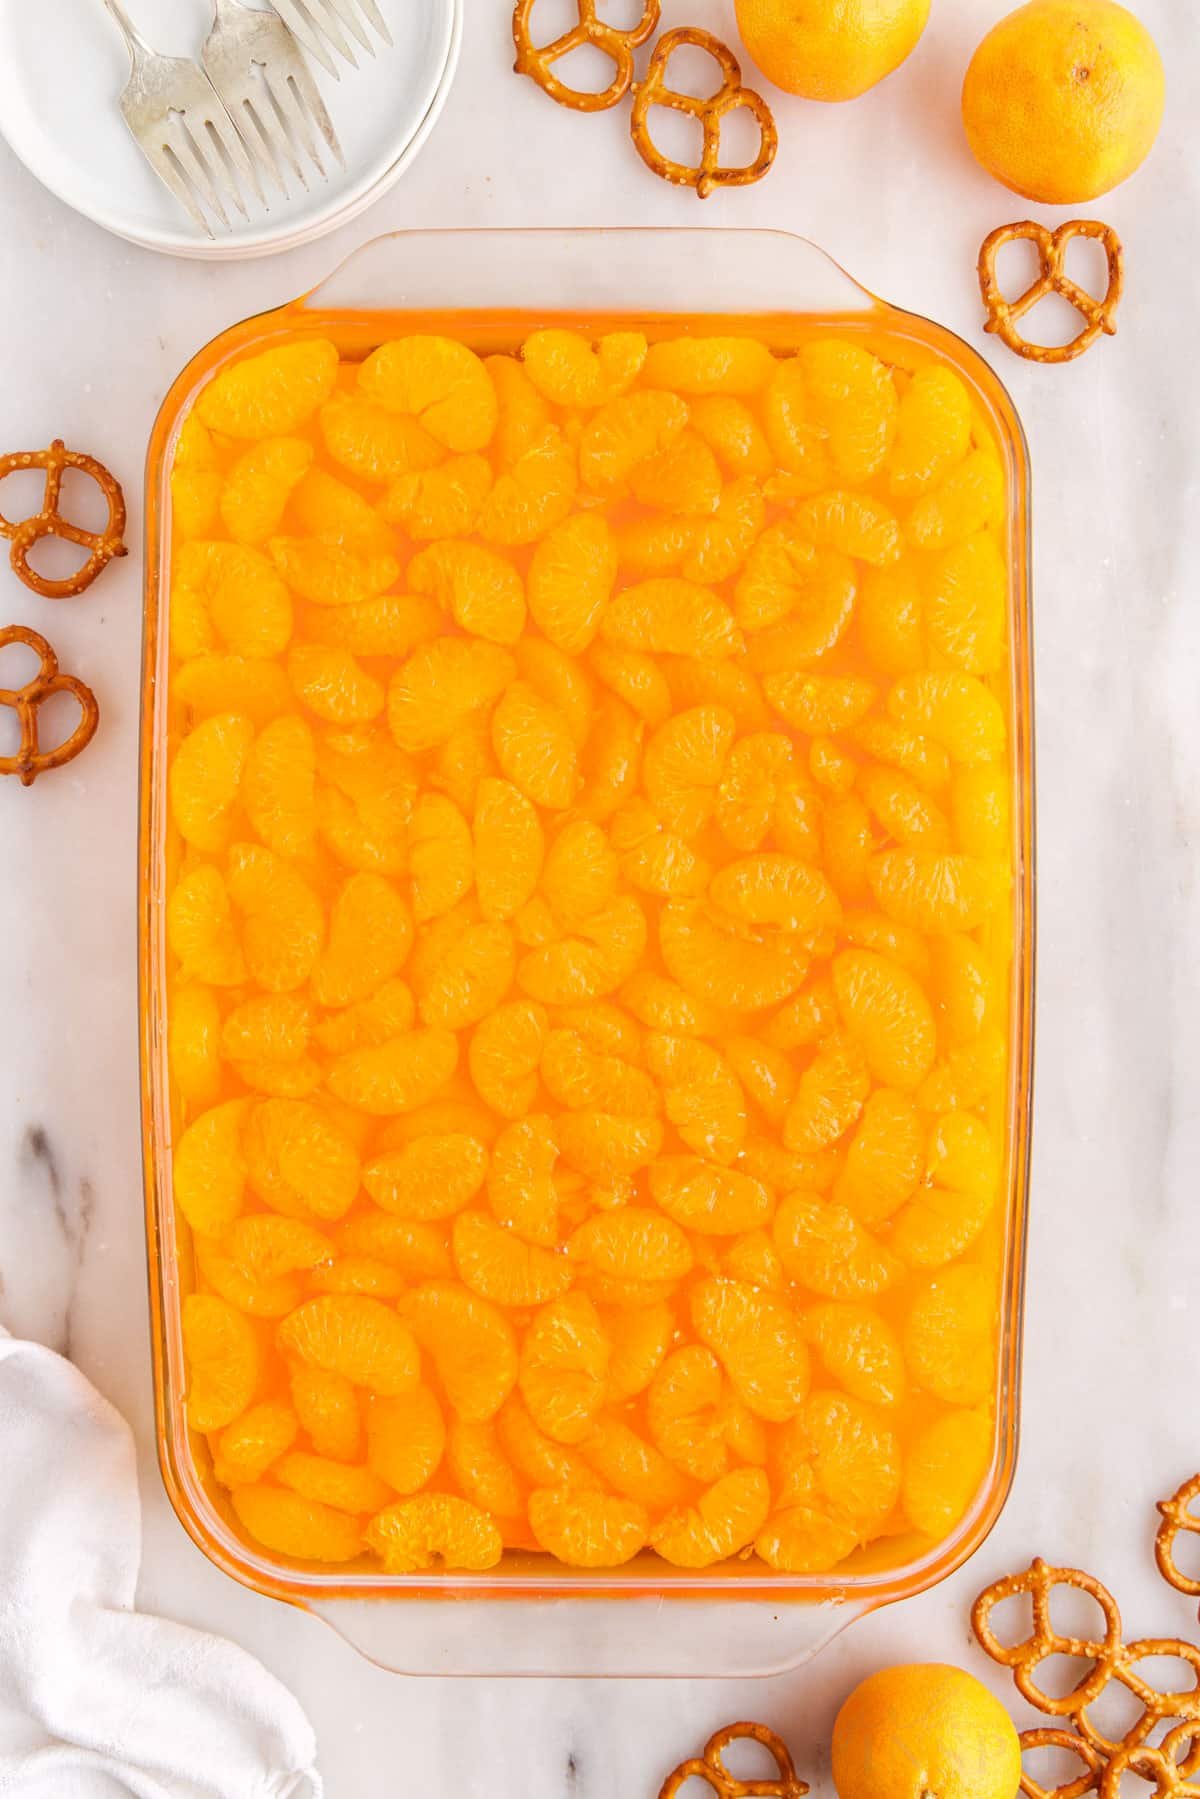 Orange gelatin mixture added to the top of the whipped topping in a 9x13 glass pan.